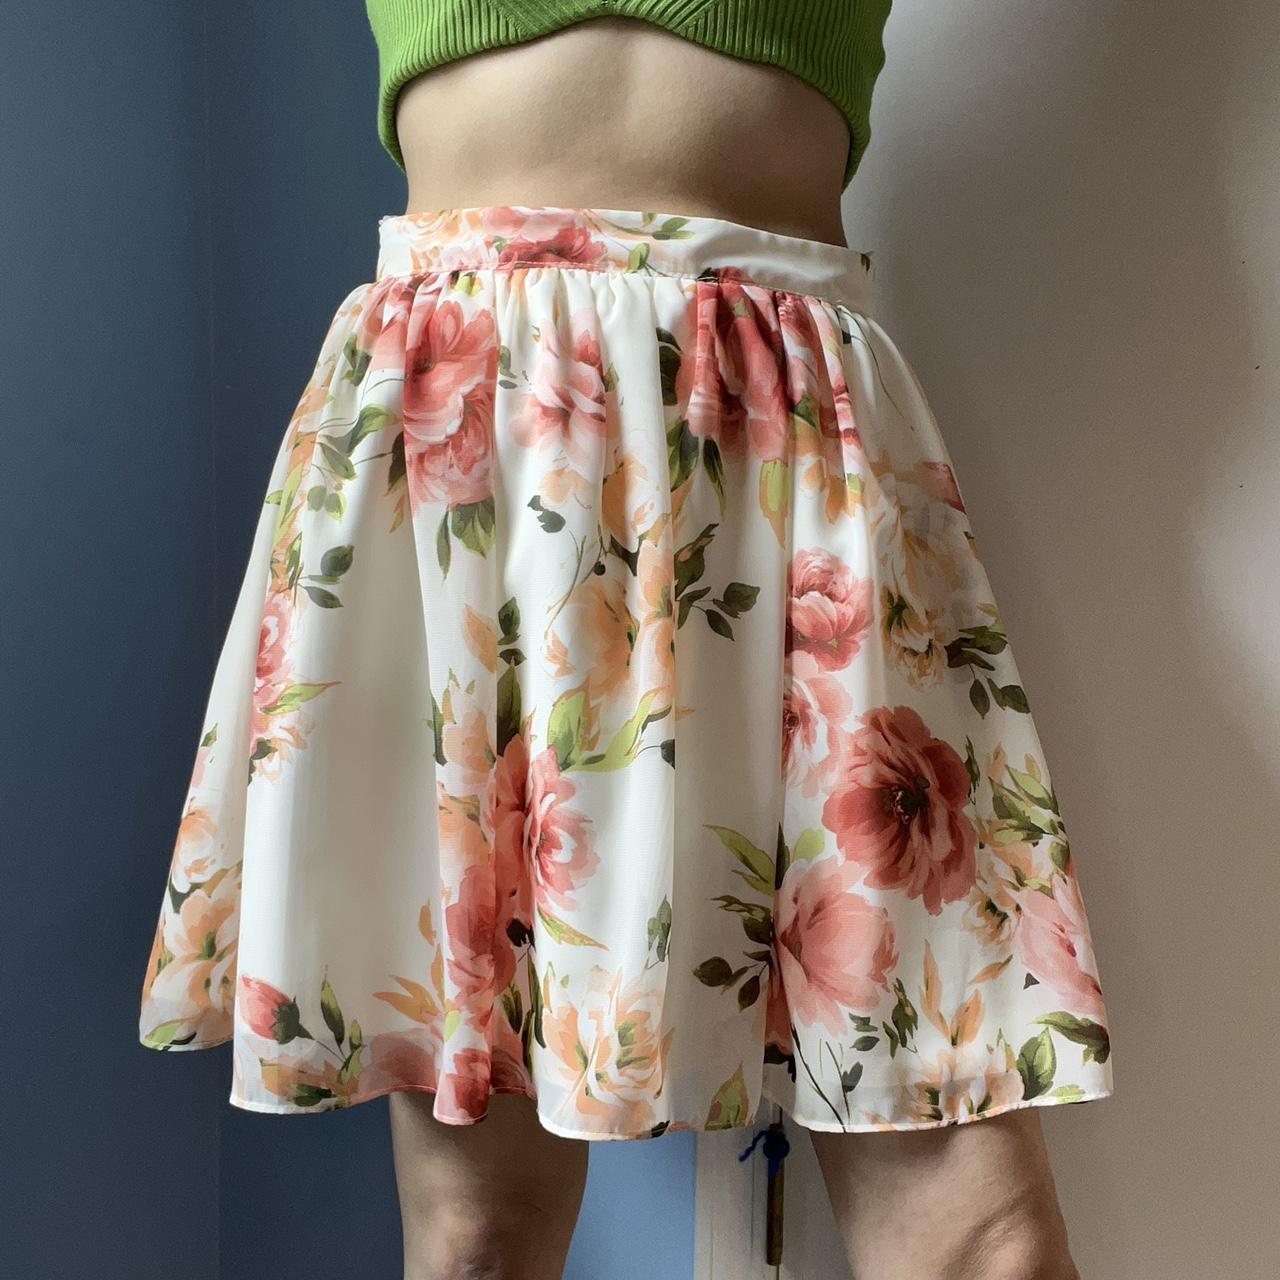 Product Image 1 - 💐B. Darlin Floral mini Skirt💐

Size